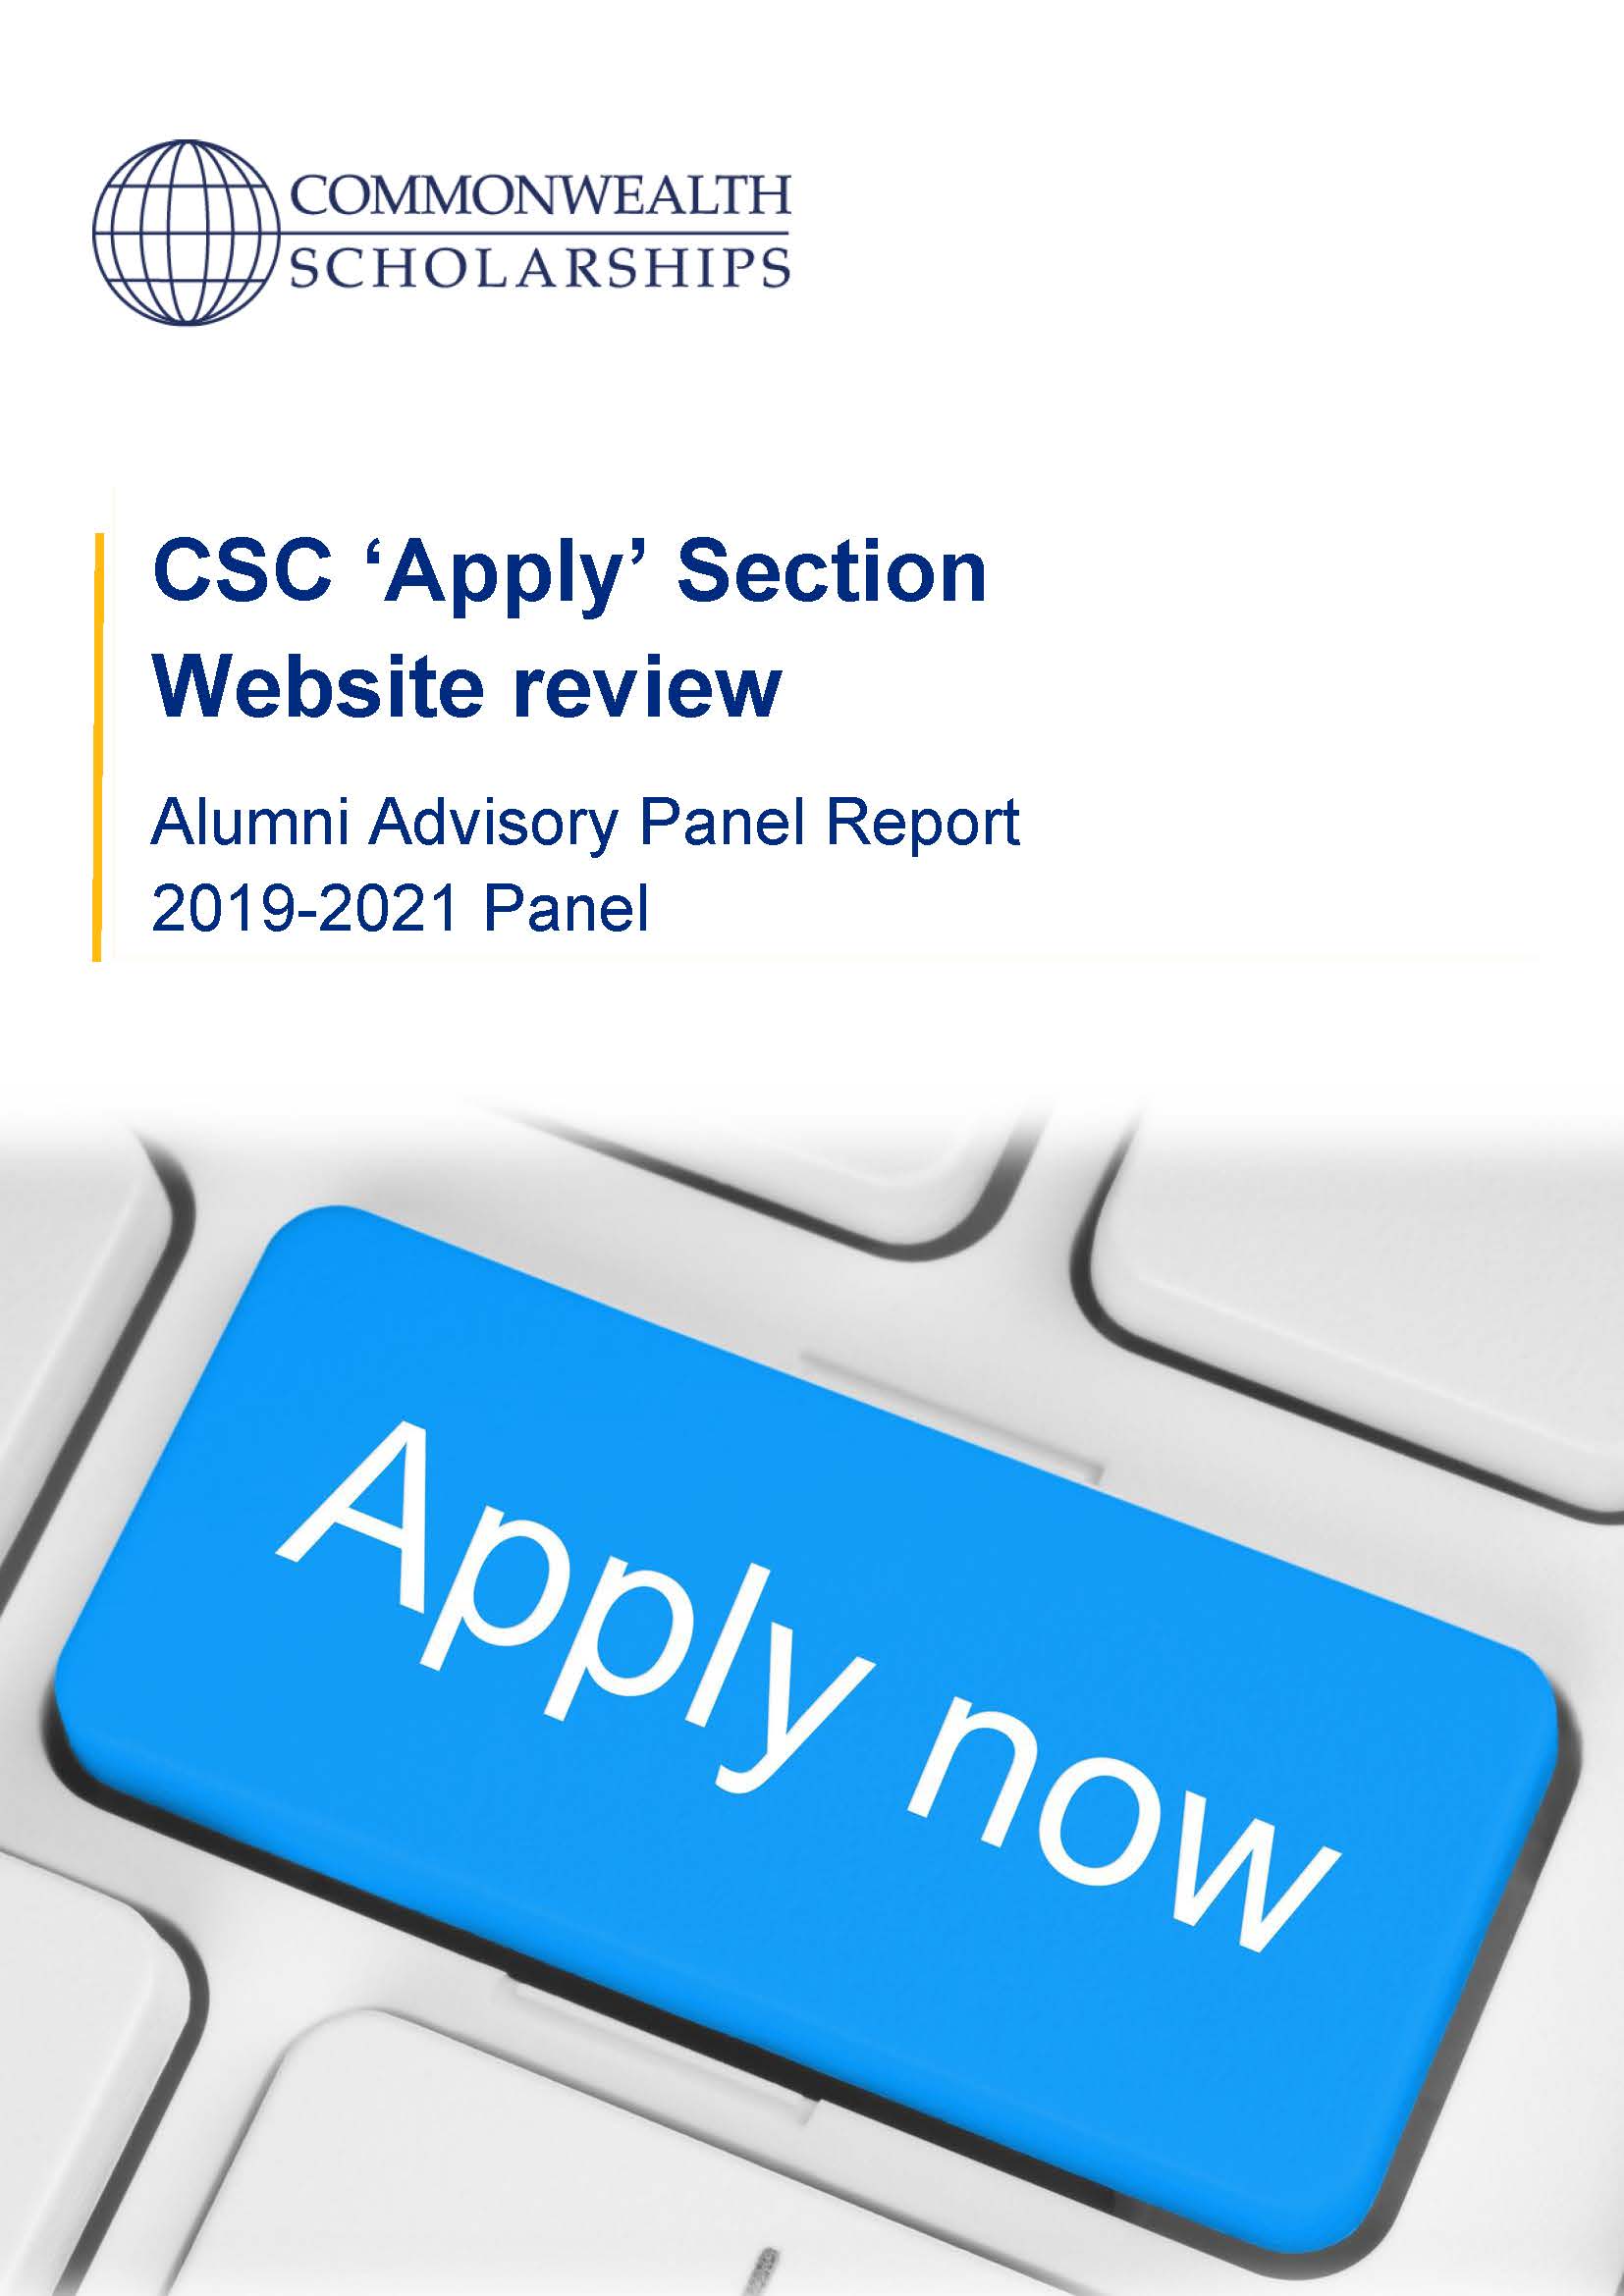 CSC Appy Section website review